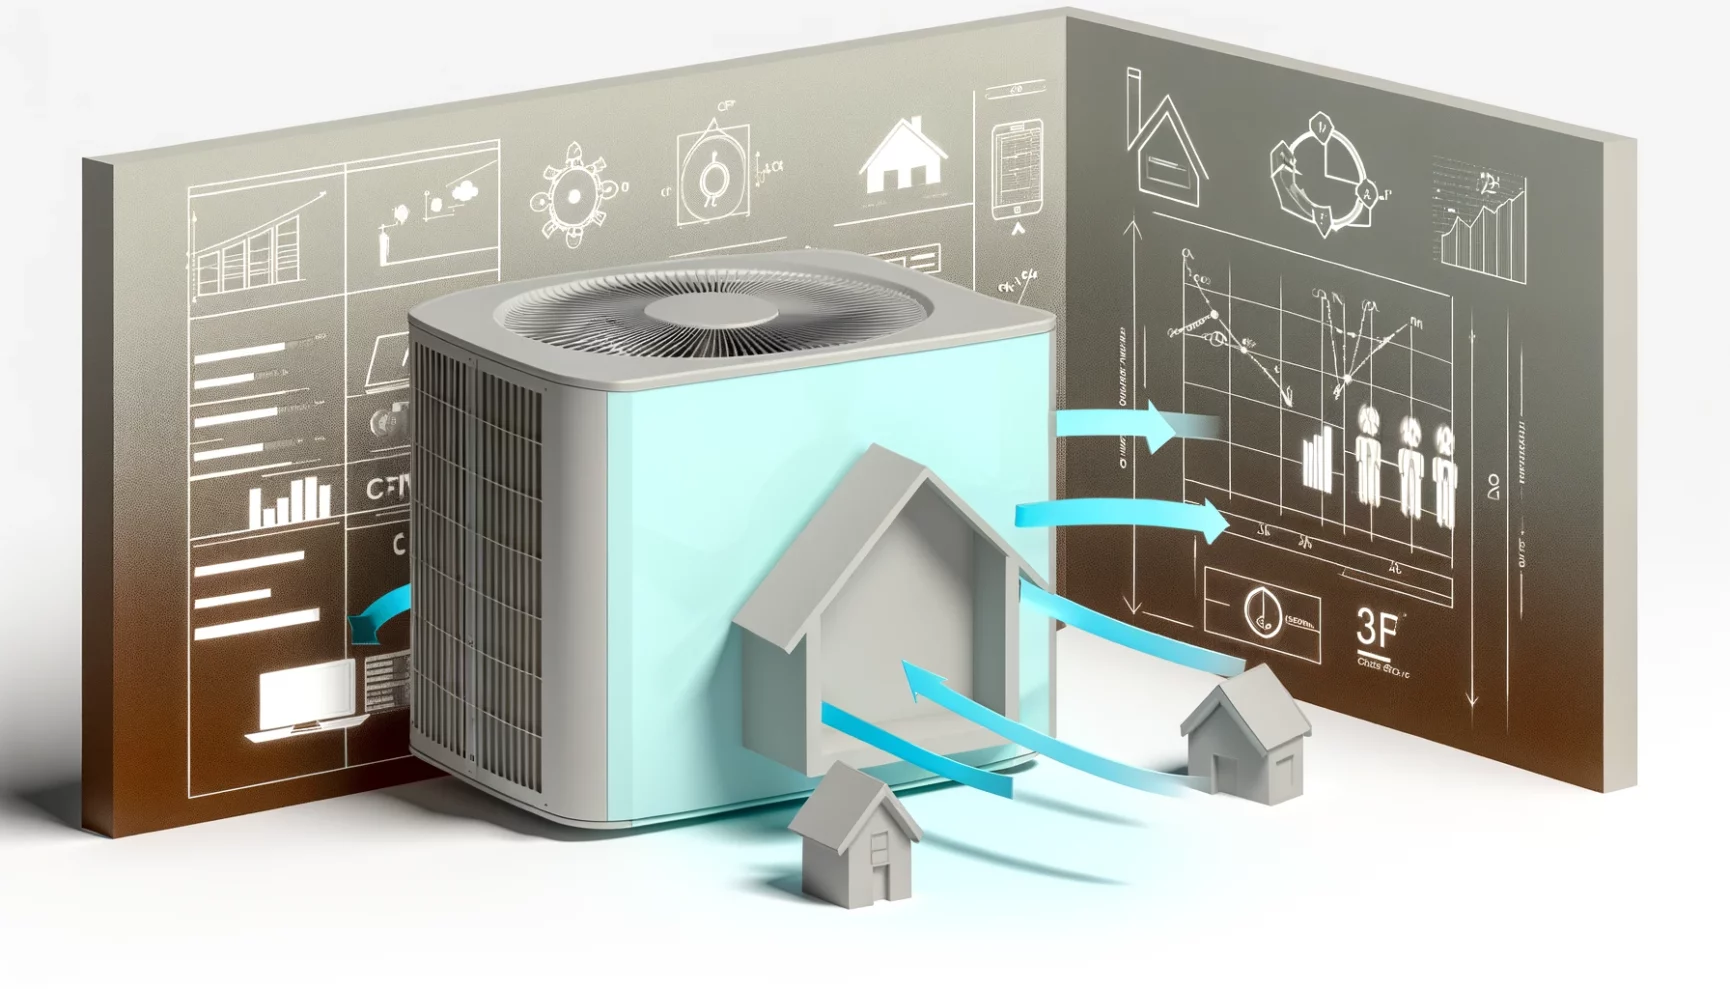 Central air conditioning unit with graphical performance analytics and airflow around a house symbol, illustrating hvac system efficiency concept.